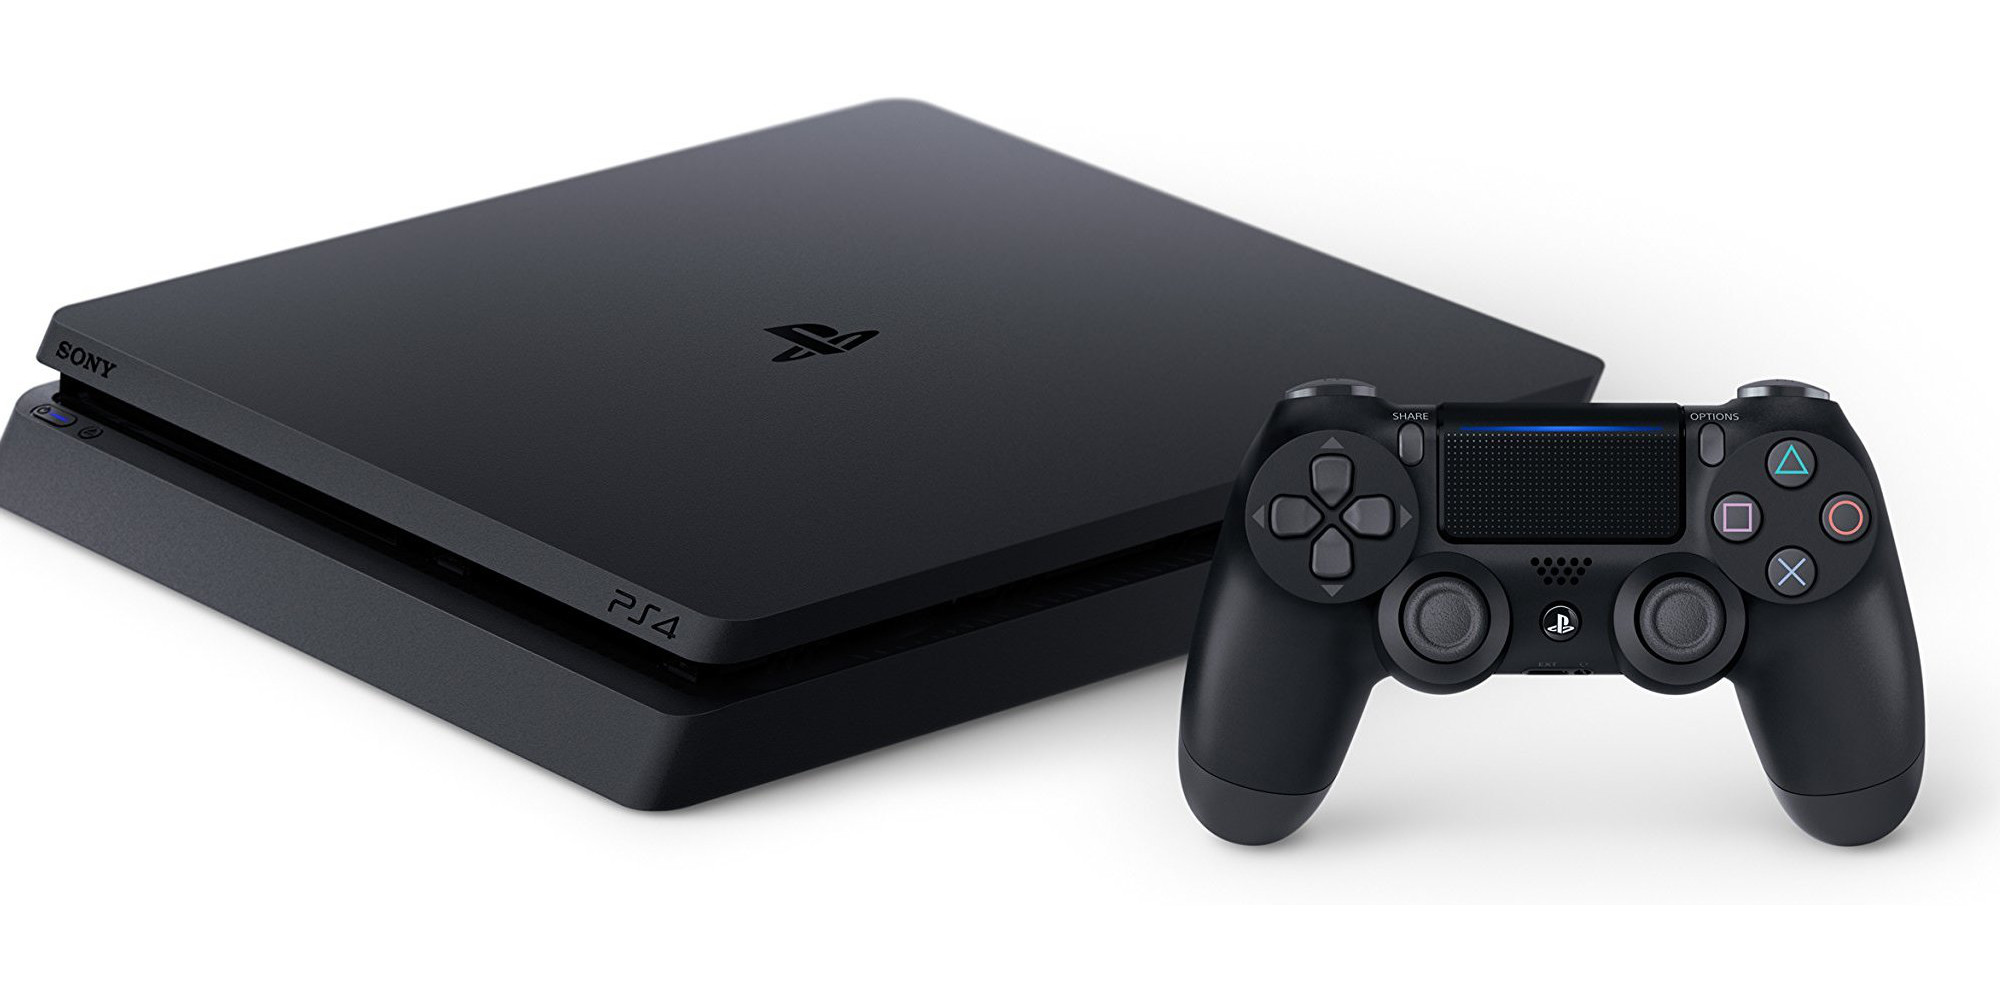 PlayStation 4 Slim 1TB Console Black Friday pricing now live: $199